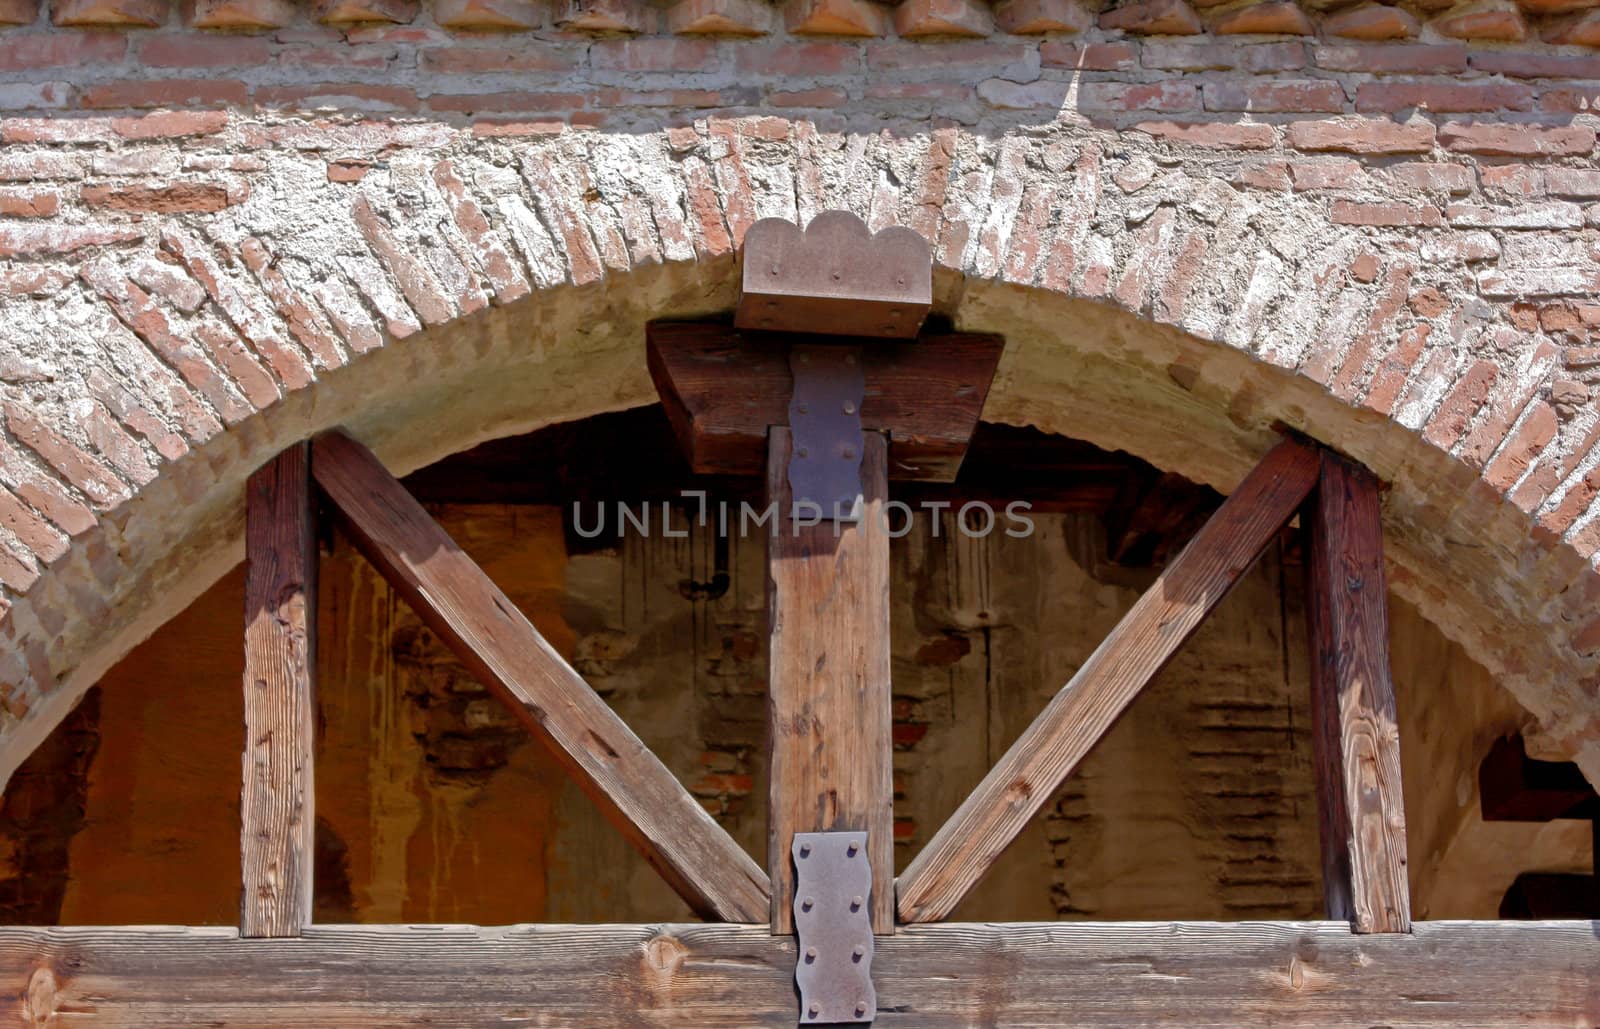 Ovehead Support at Mission San Juan Capistrano by wolterk